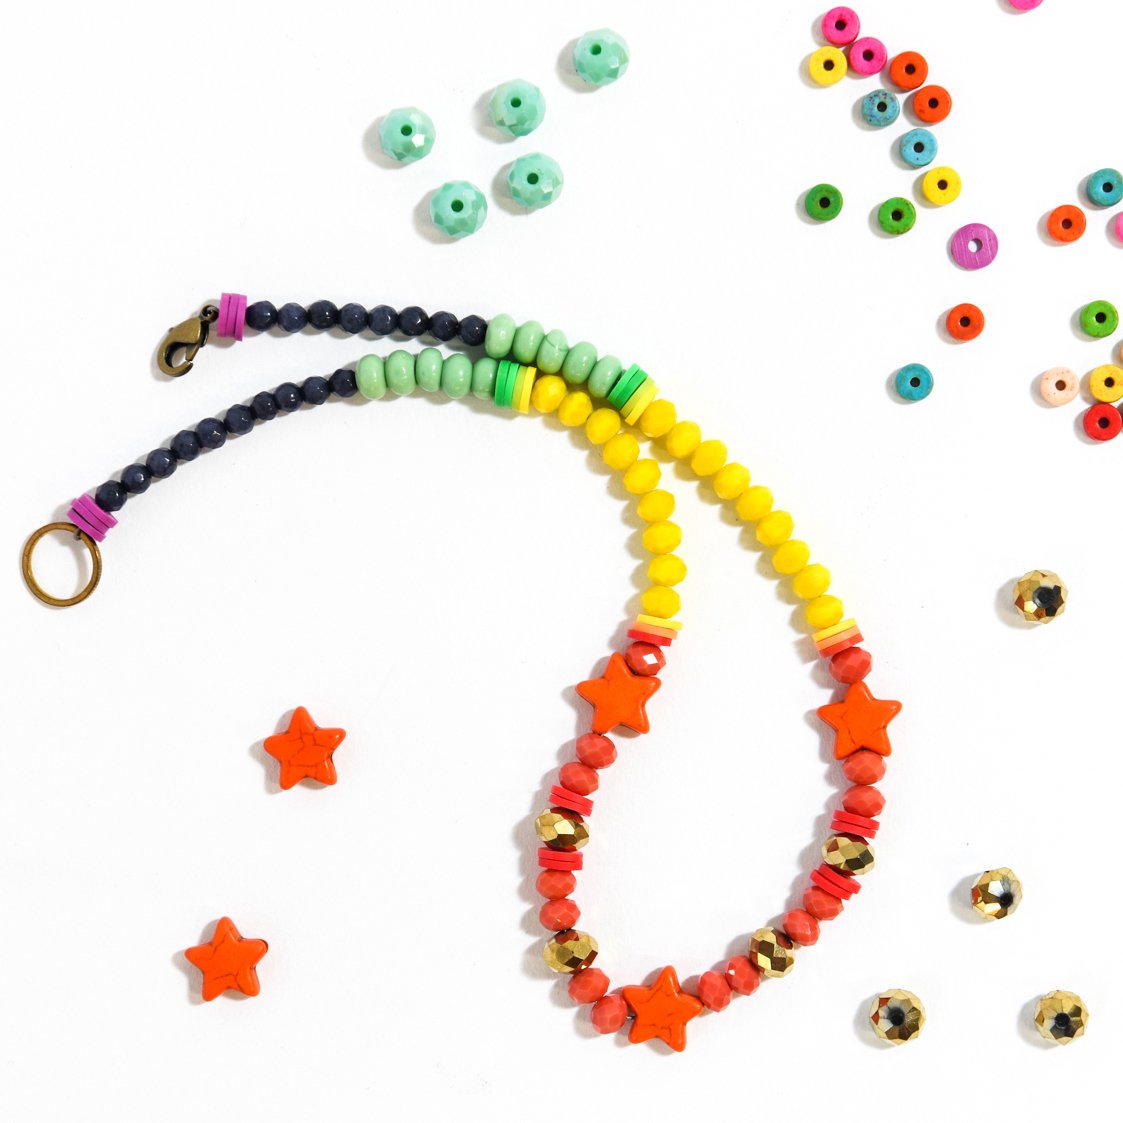 10 best holiday gifts for little kids 3-7 : DIY rainbow necklace beading kit from Saskia | Small Business Holiday Gift Guide 2020